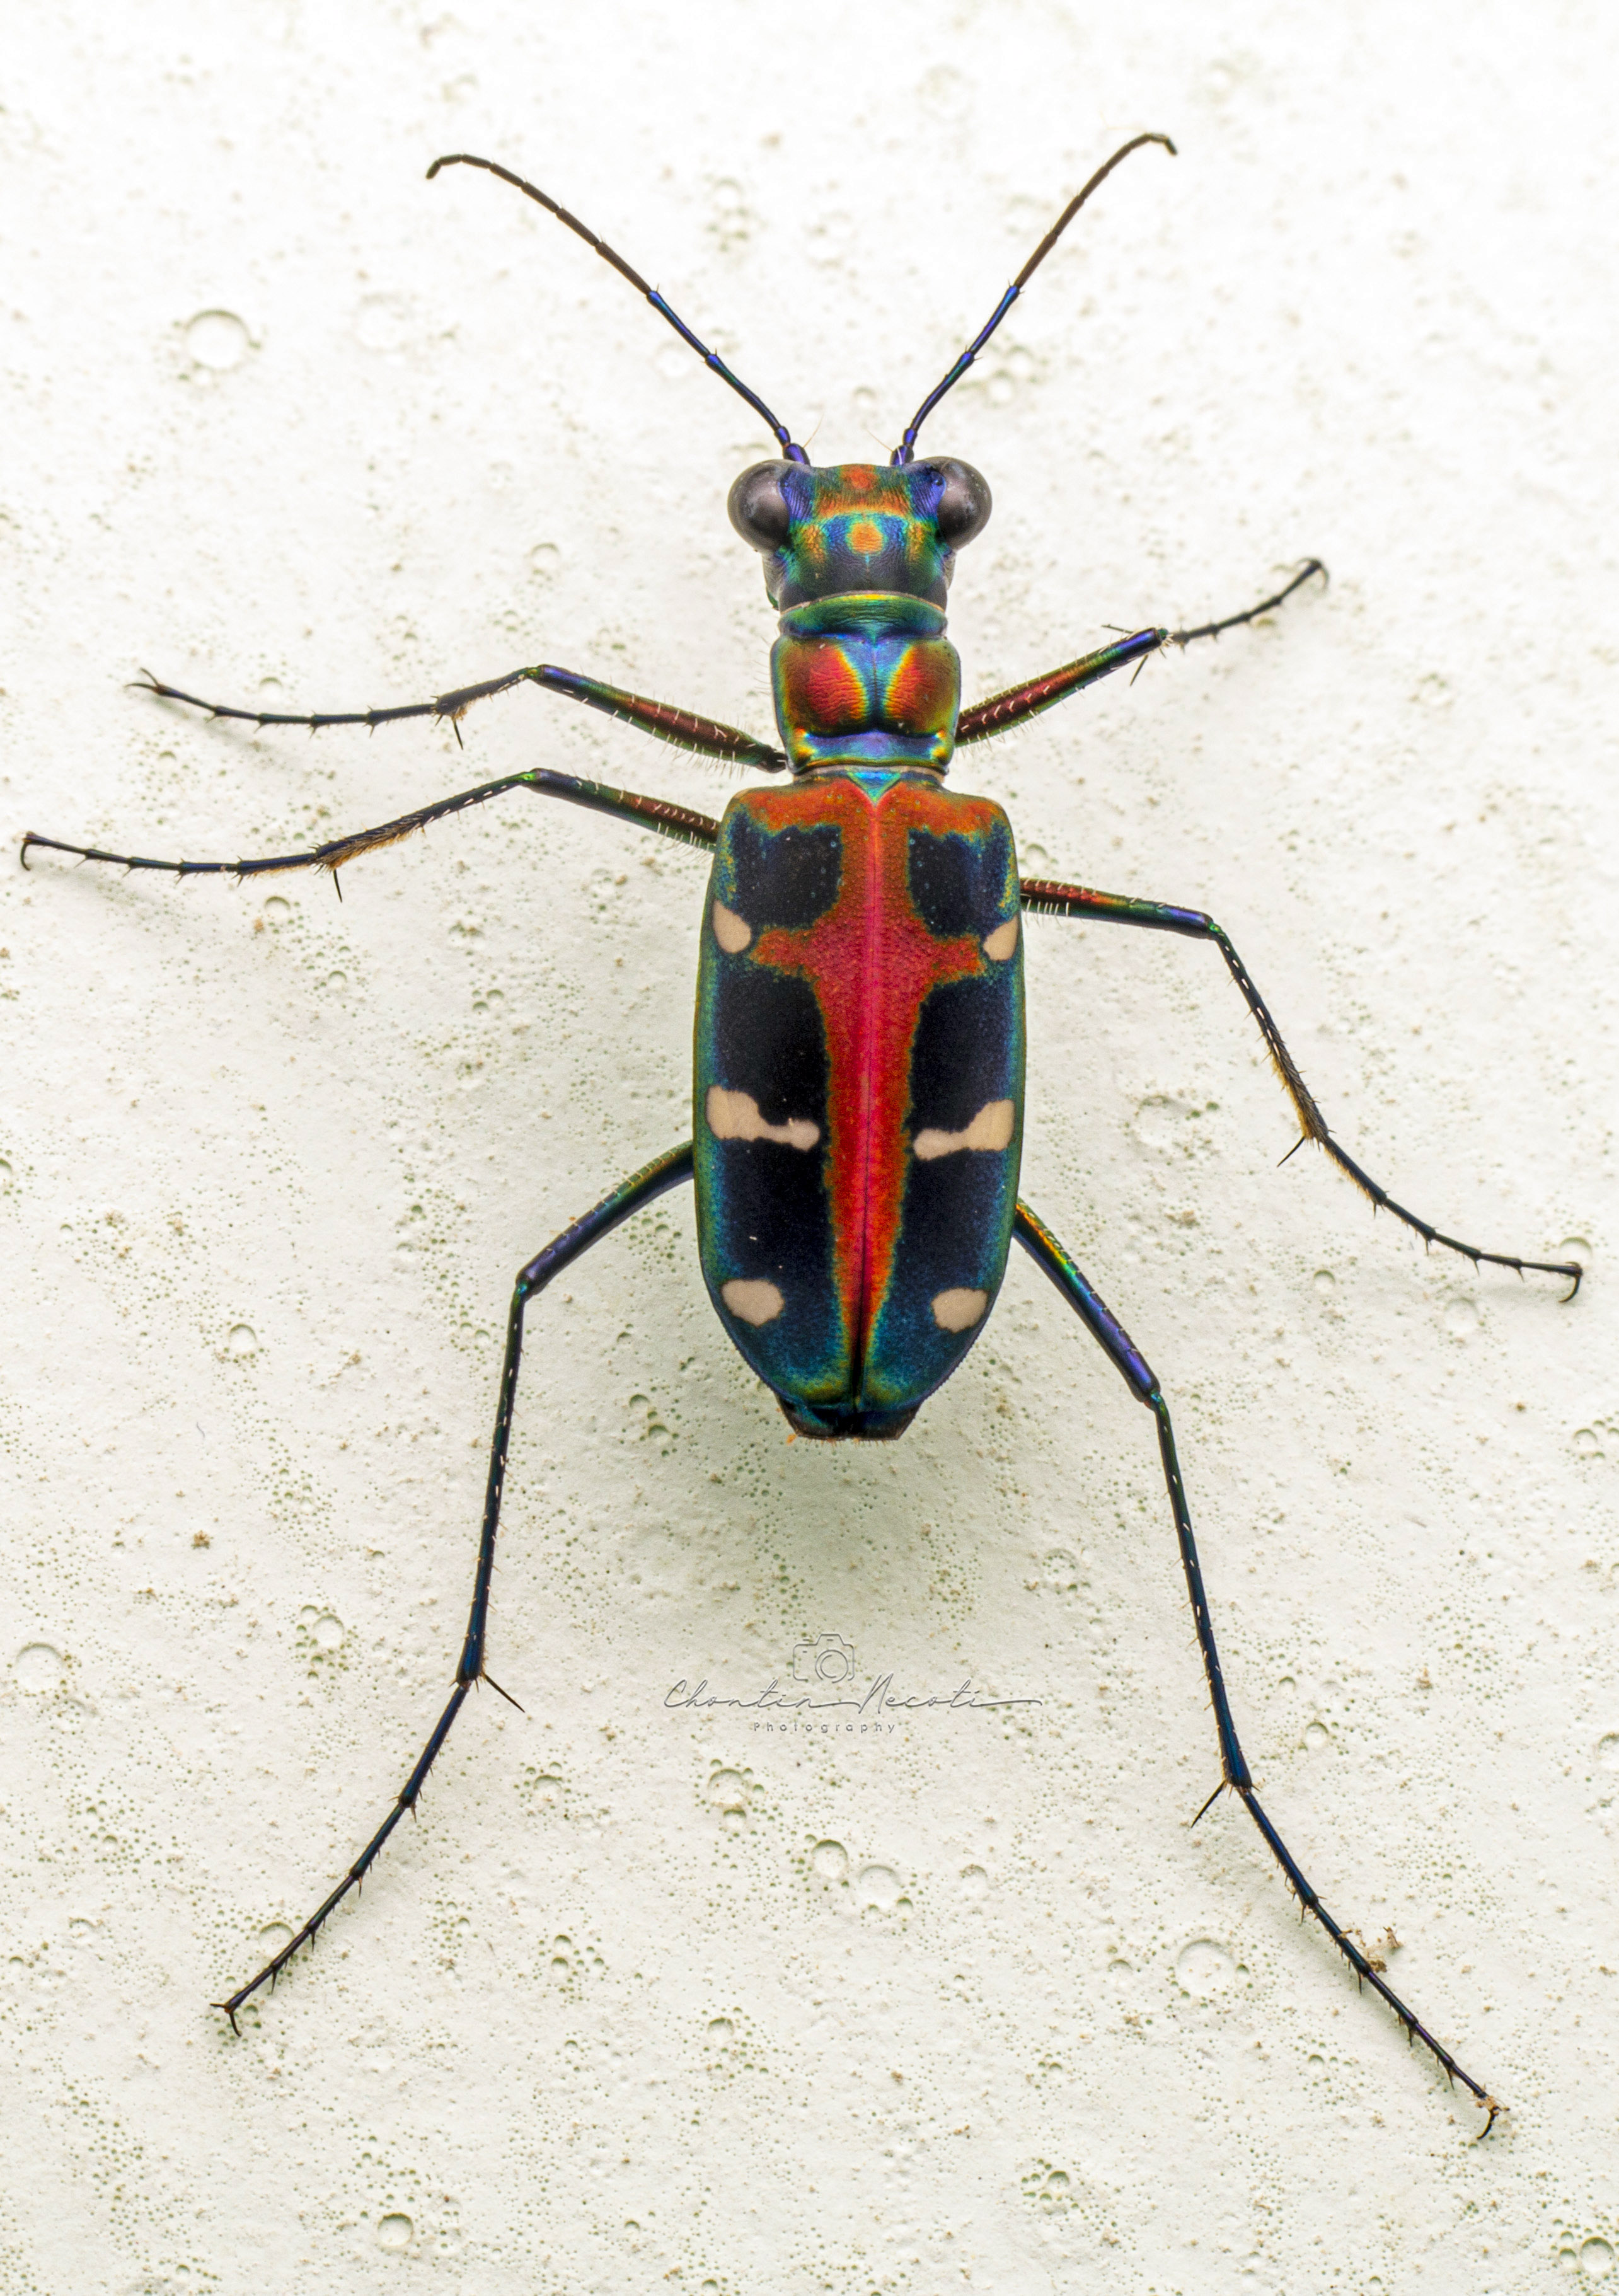 Tiger beetle, animal, macro, focus, color, wall, insect, fast, garden, nature, natural, NeCoTi ChonTin